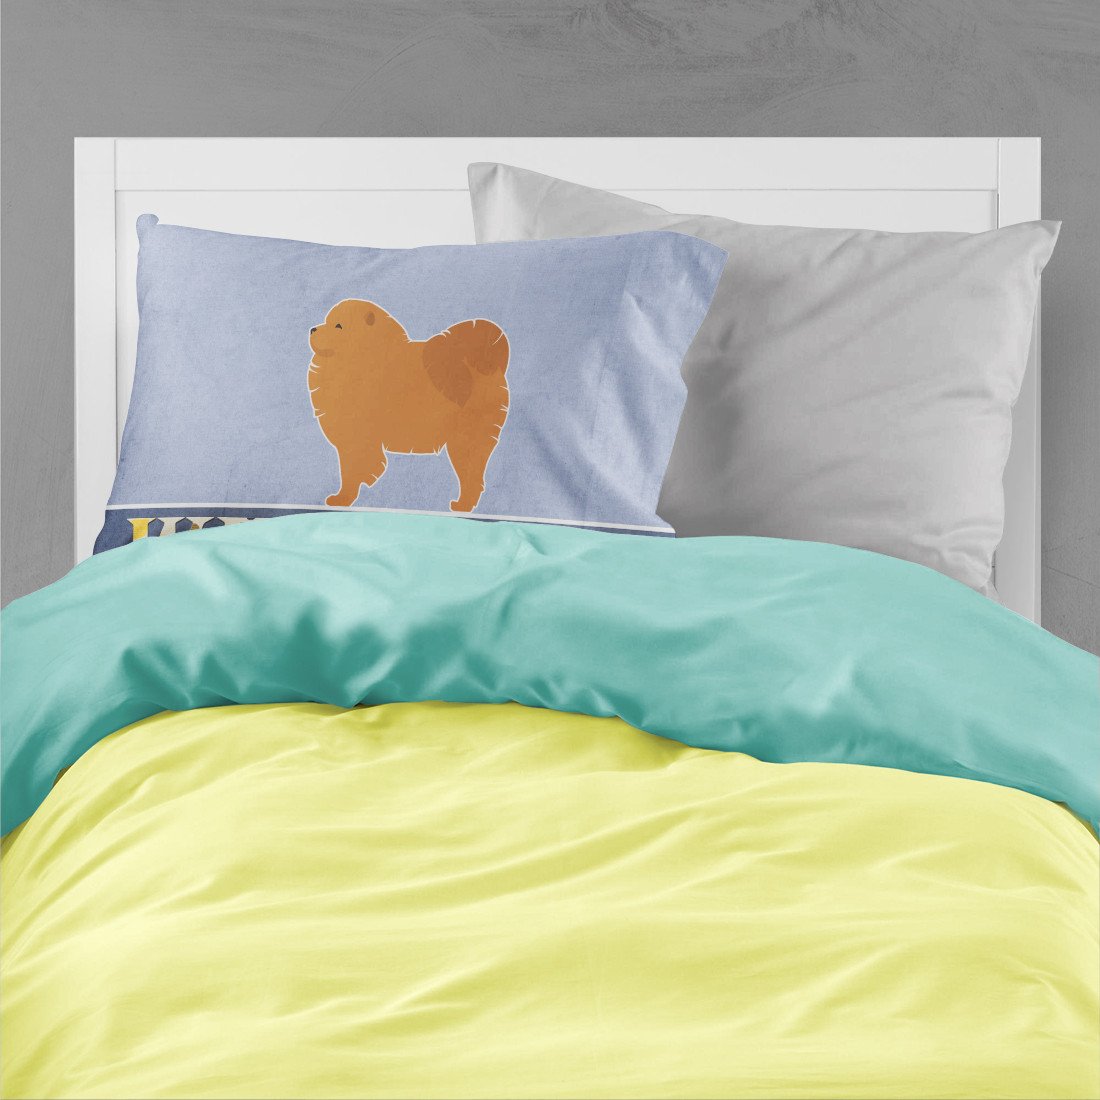 Chow Chow Welcome Fabric Standard Pillowcase BB5555PILLOWCASE by Caroline's Treasures